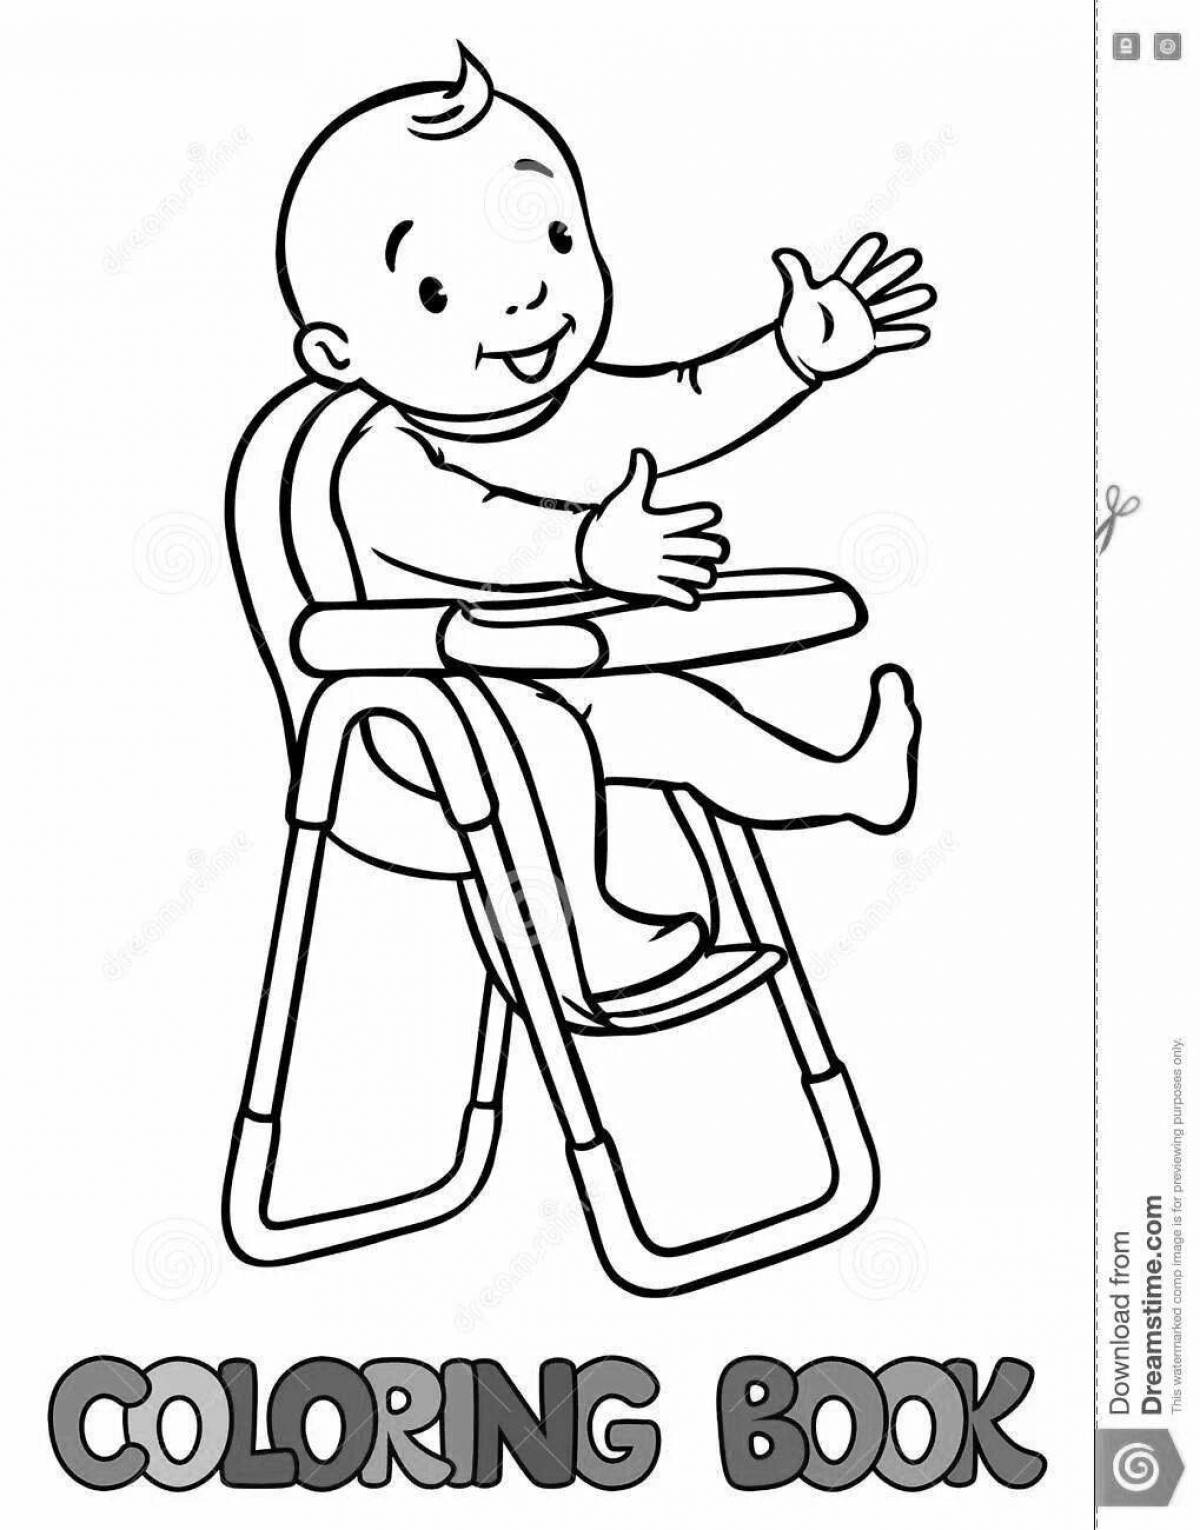 Playful highchair coloring page